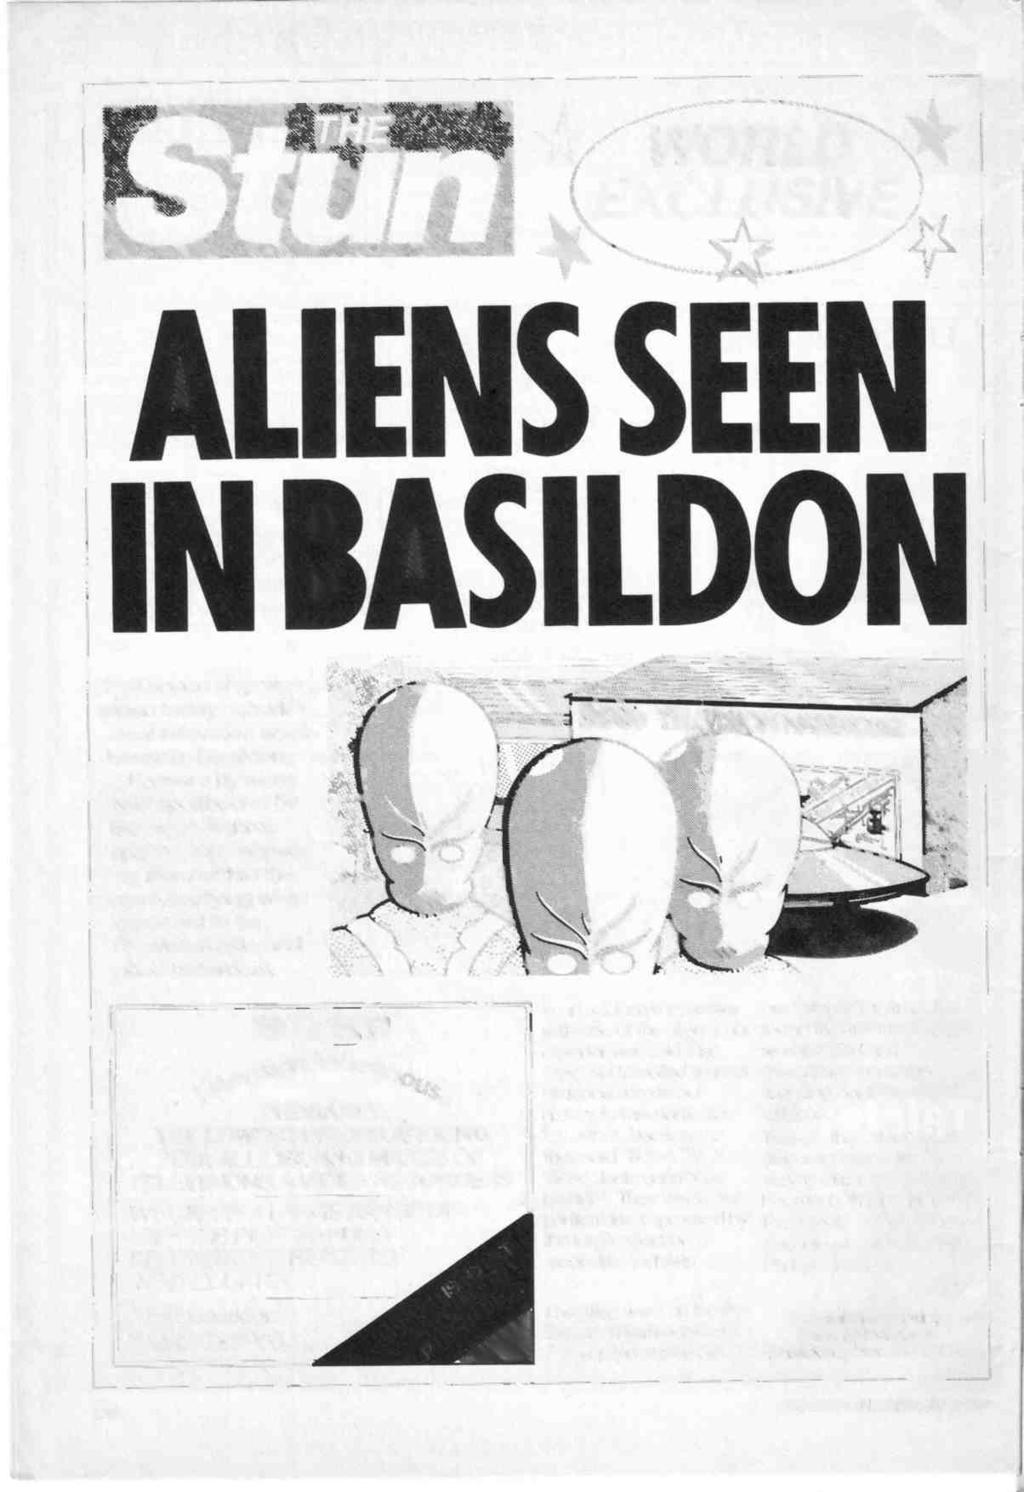 4tEXTZVE ALIENS SEEN IN BASILDON A space ship was seen today outside a local television ware house in Basildon.